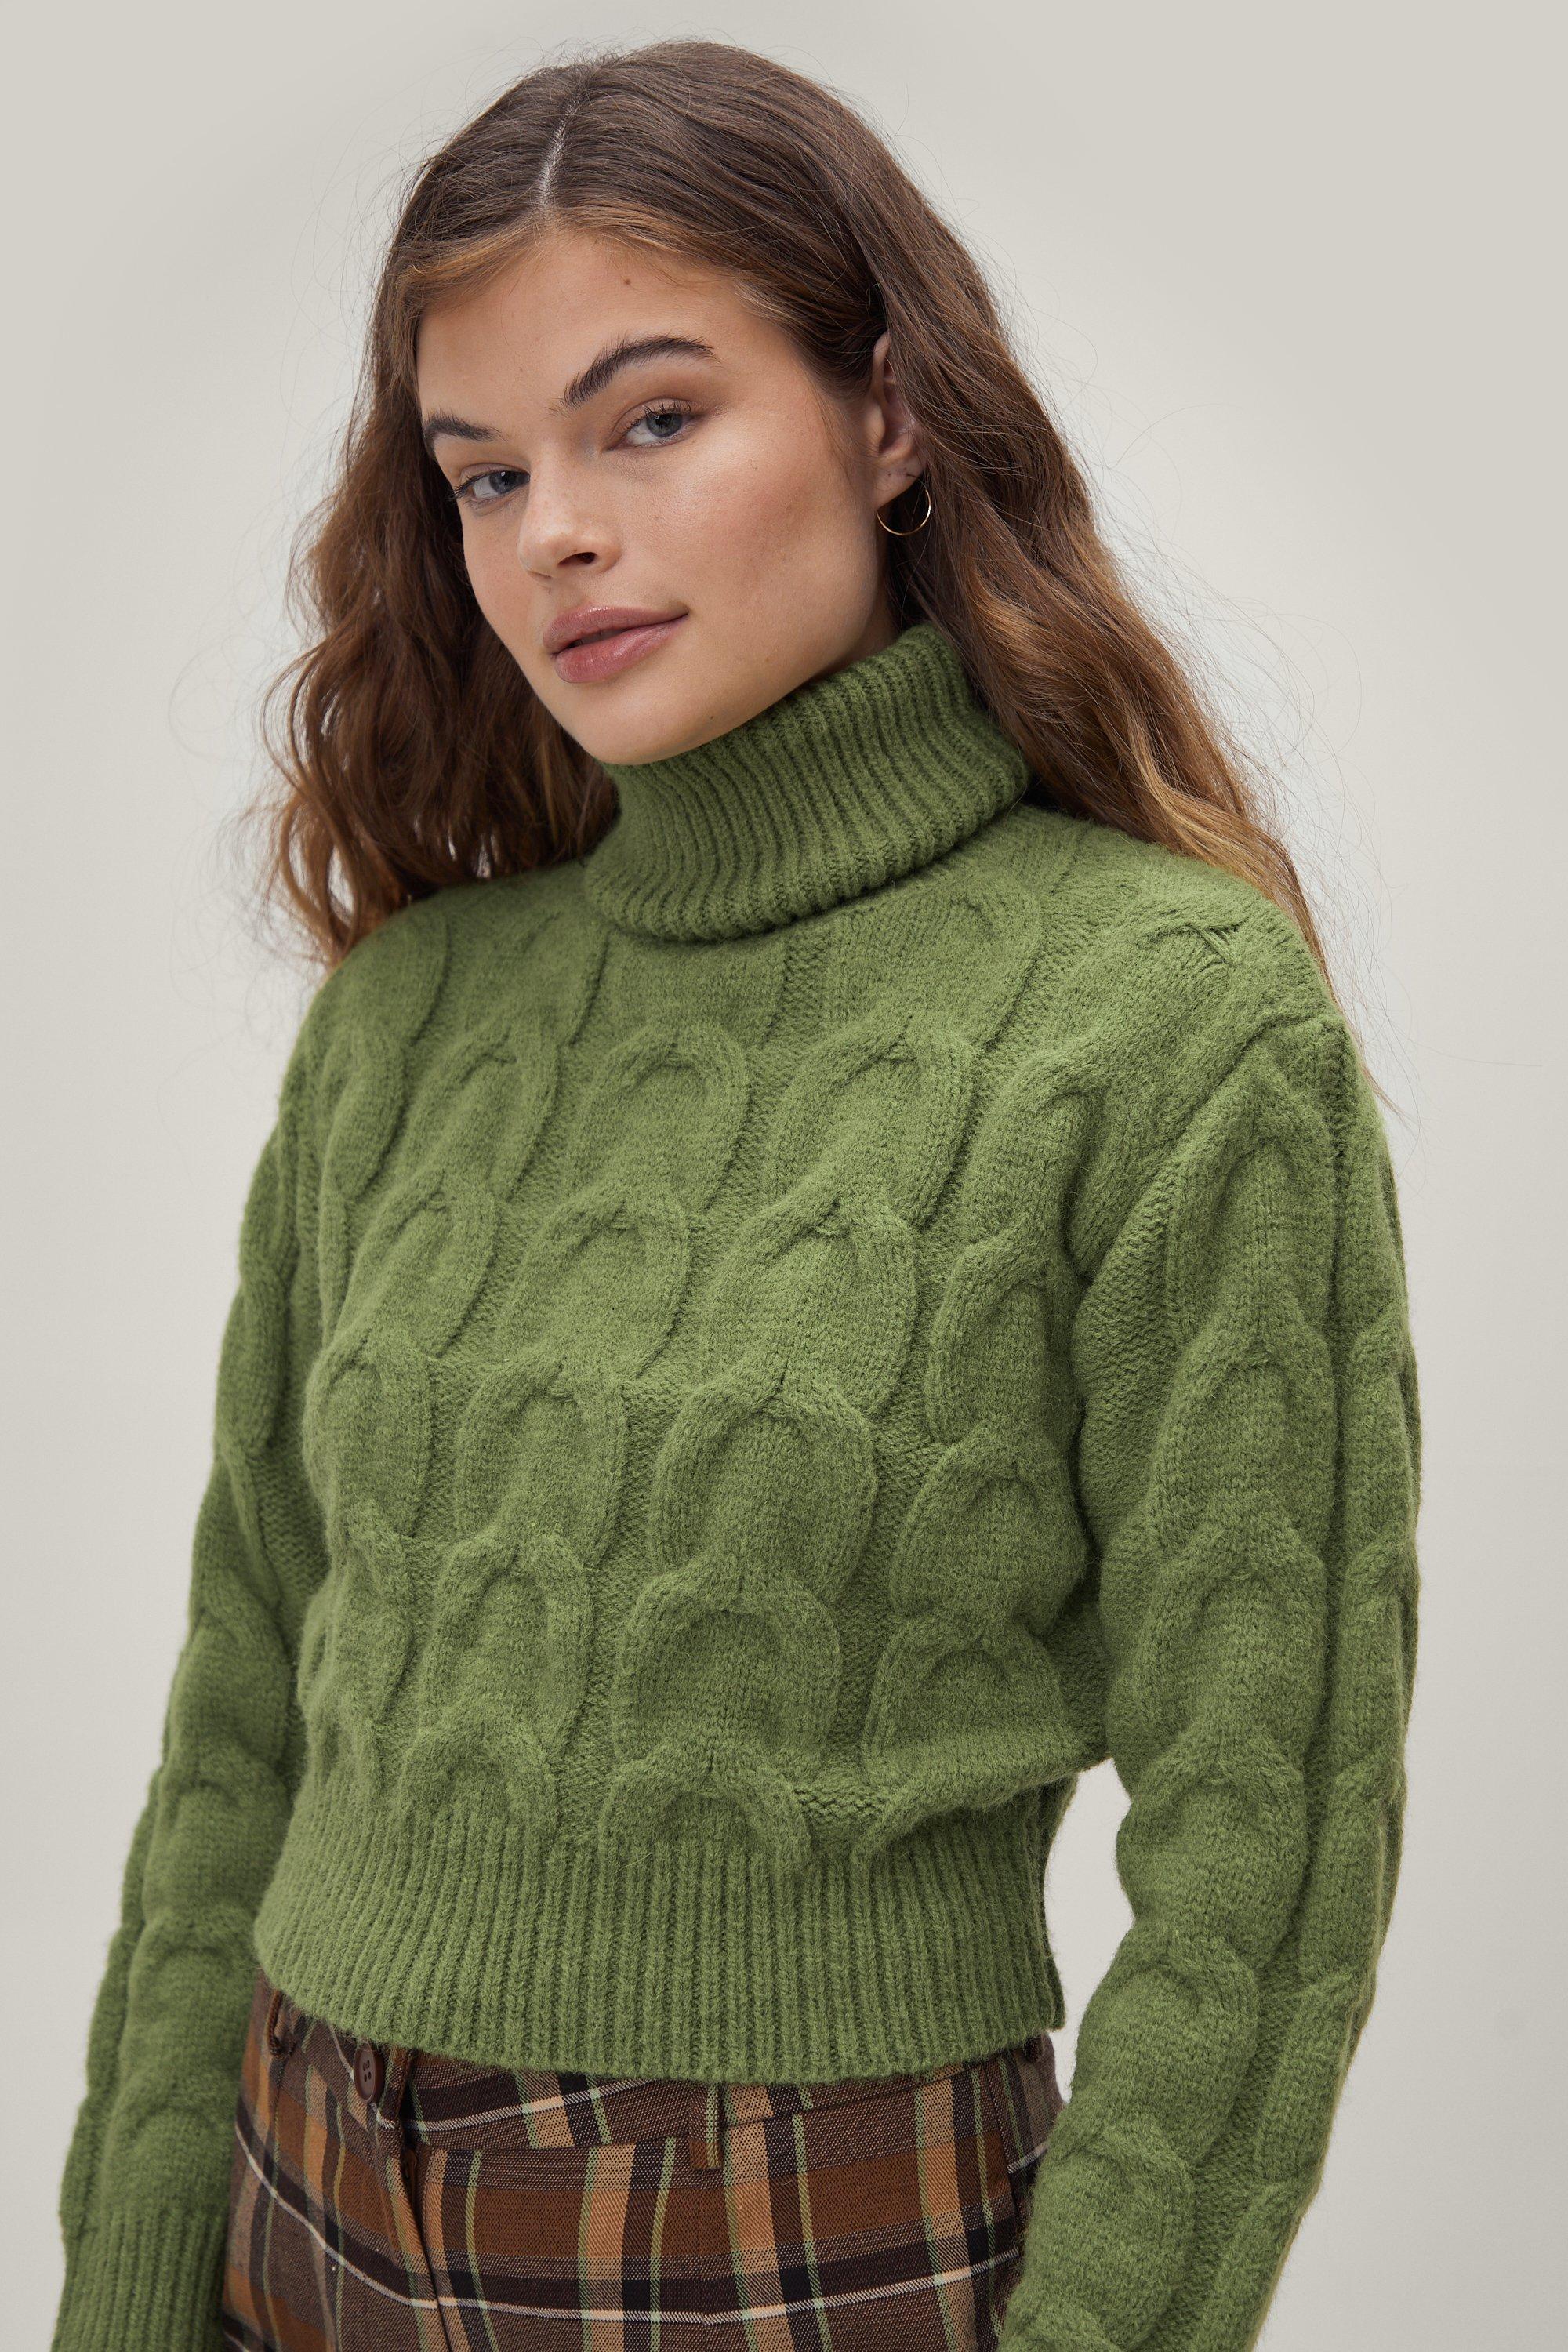 Vintage Sweaters – 1910s, 1920s, 1930s Pictures Womens Recycled Content Cable Turtle Neck Jumper - Green - 12 $29.70 AT vintagedancer.com